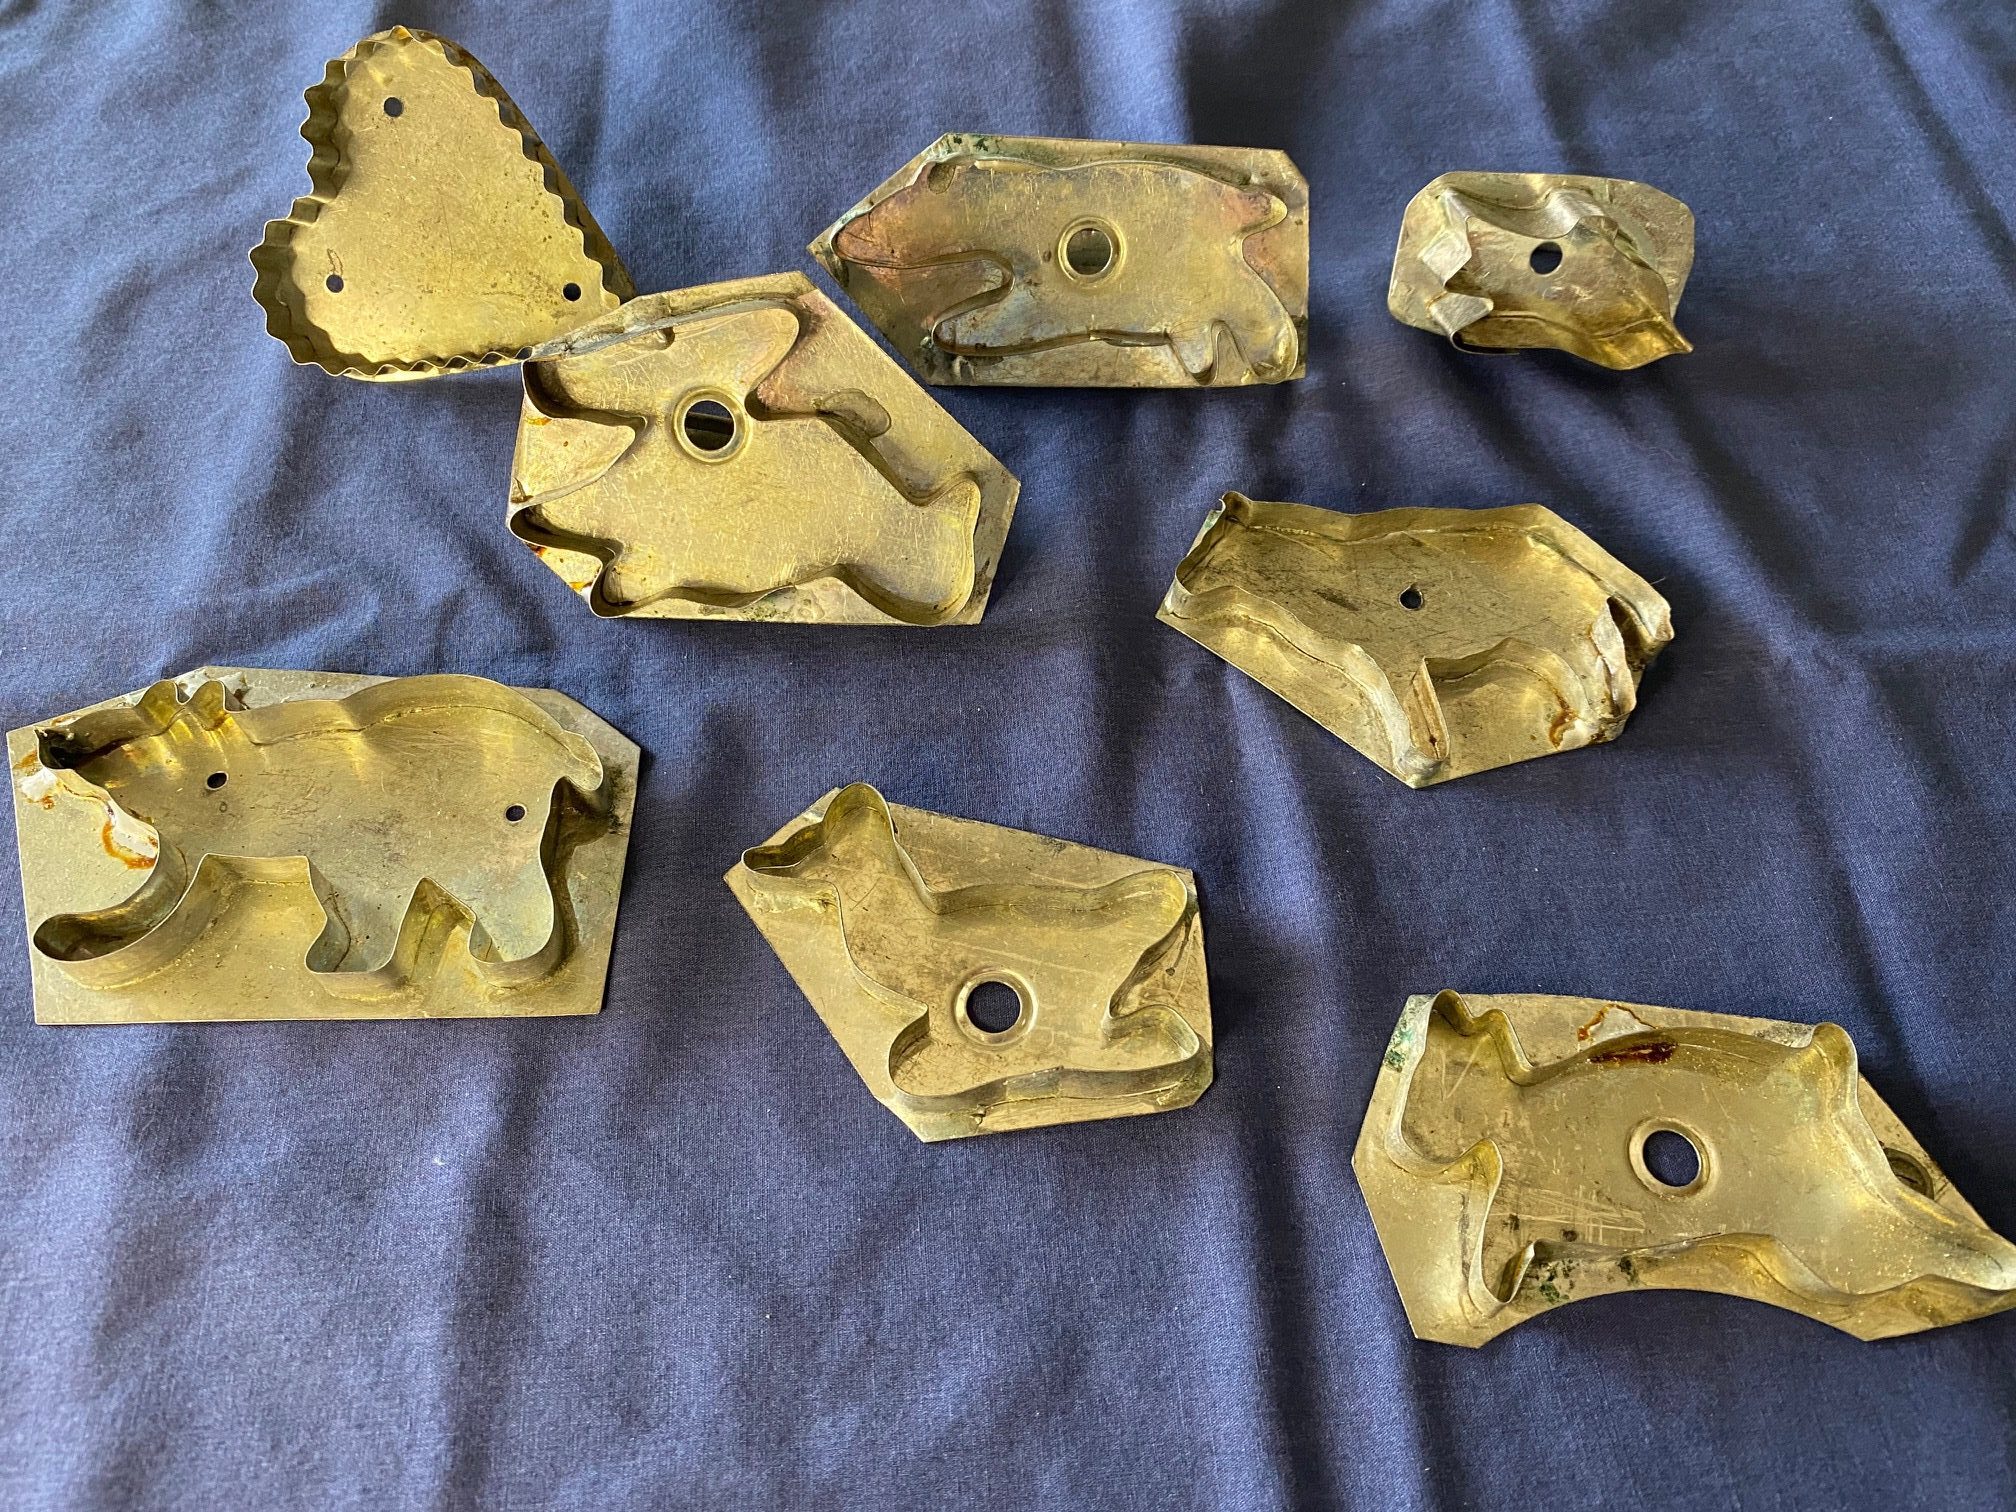 Group of 8 Early Primitive Cookie Cutters #1